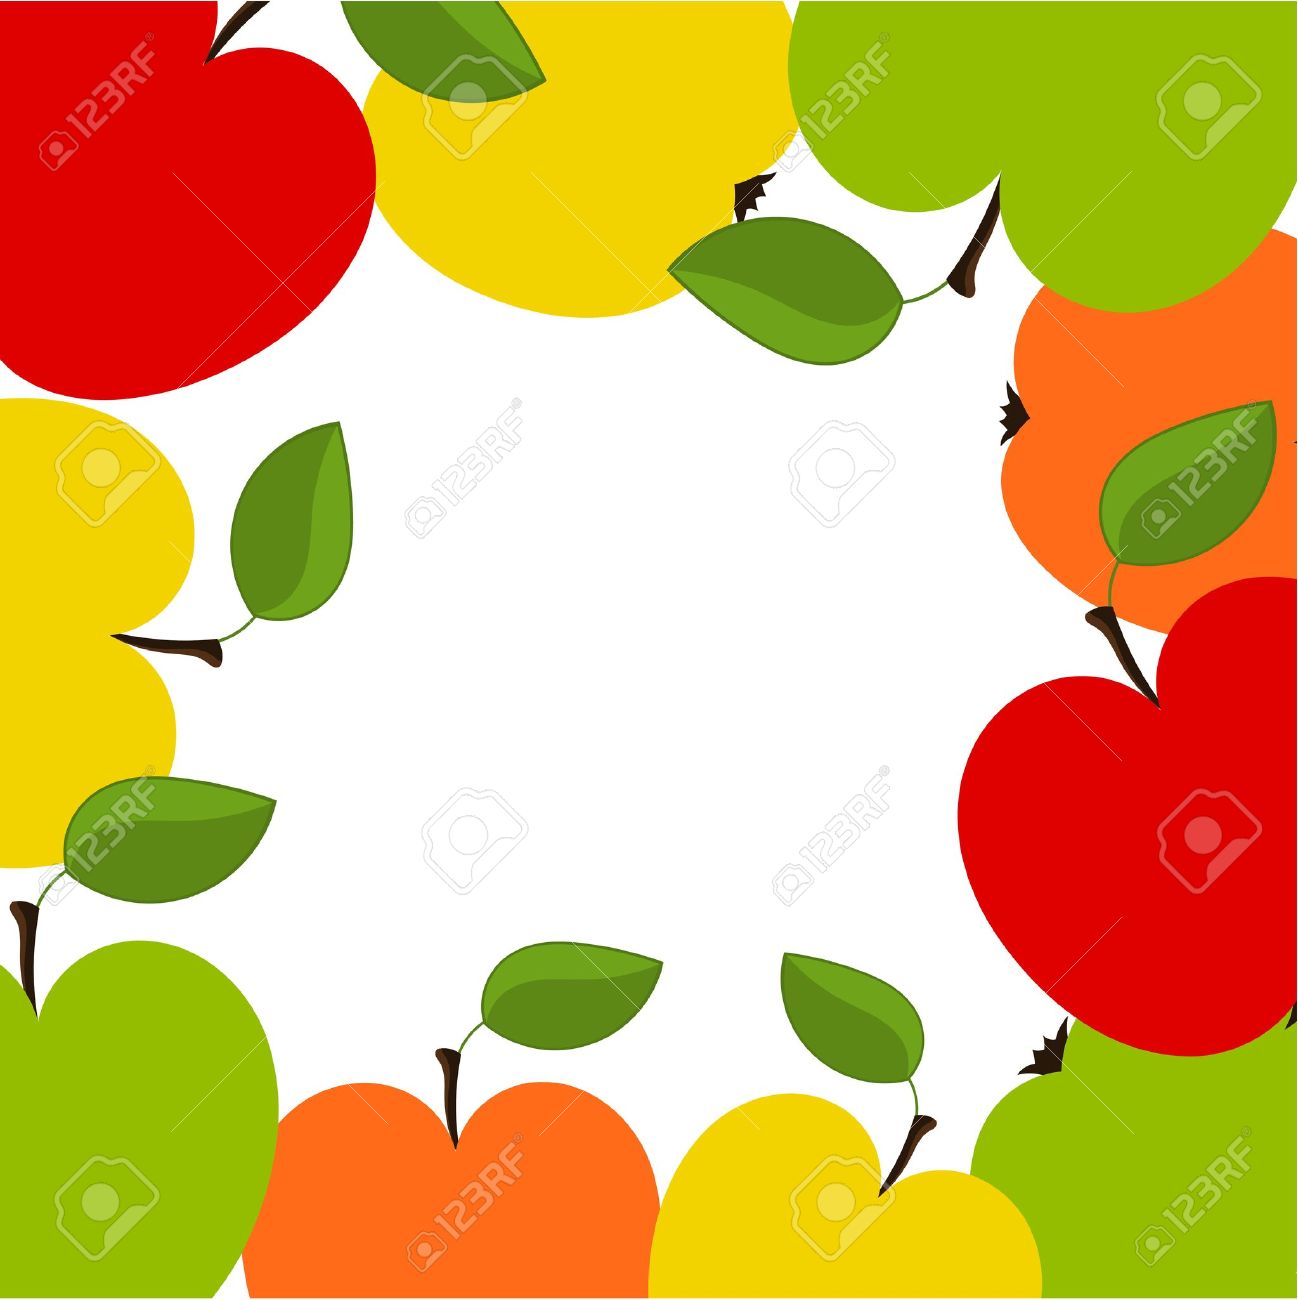 Apple Clip Art Foods Cleancli